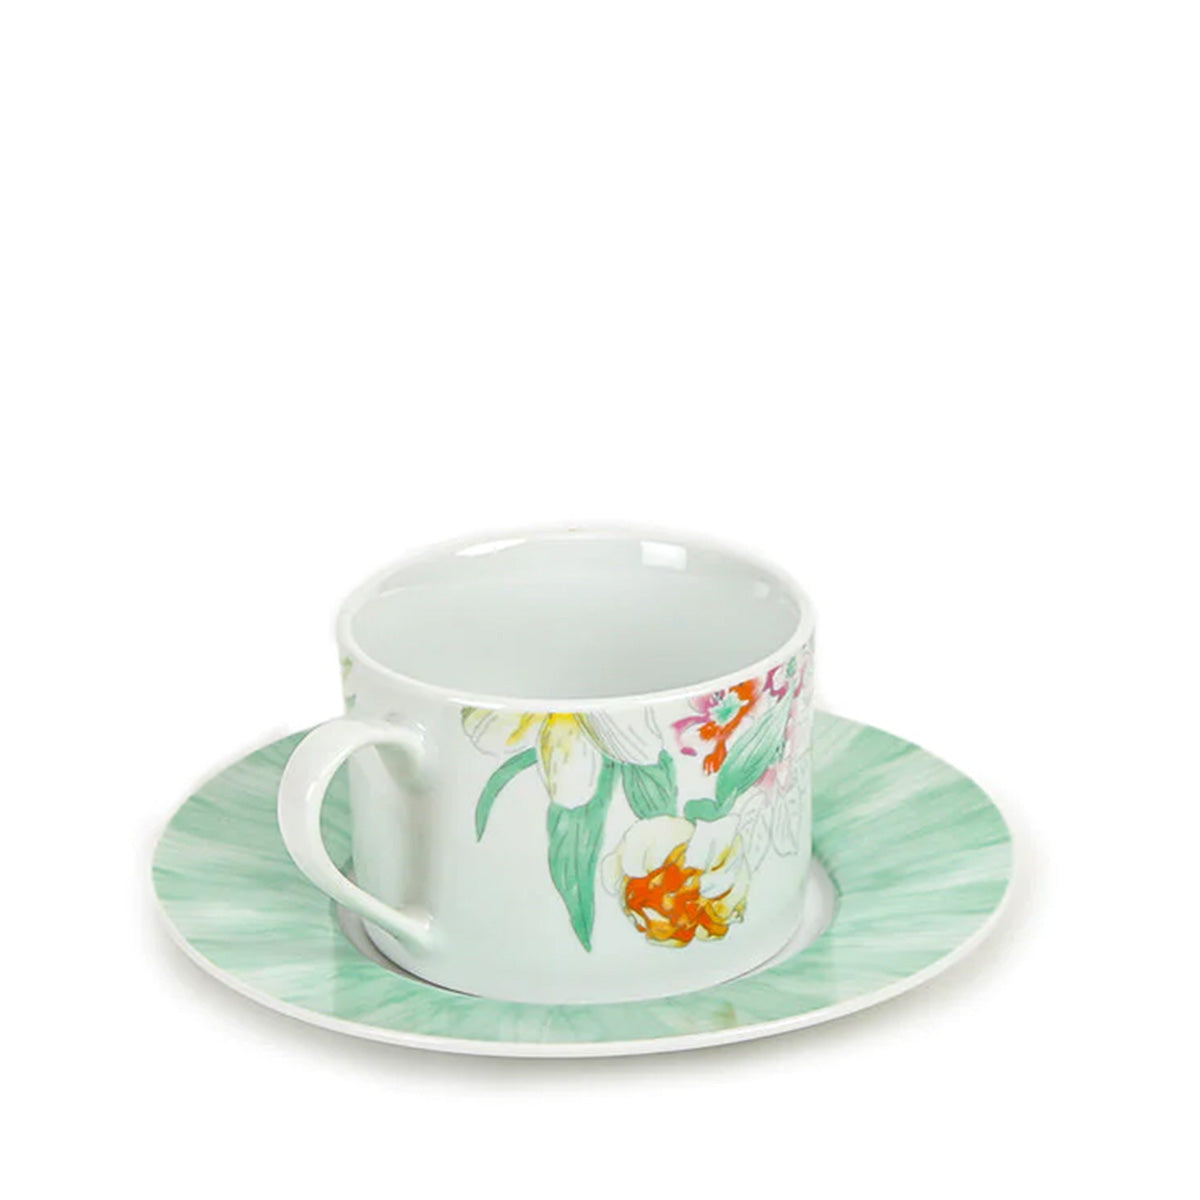 Amore Cup & Saucer